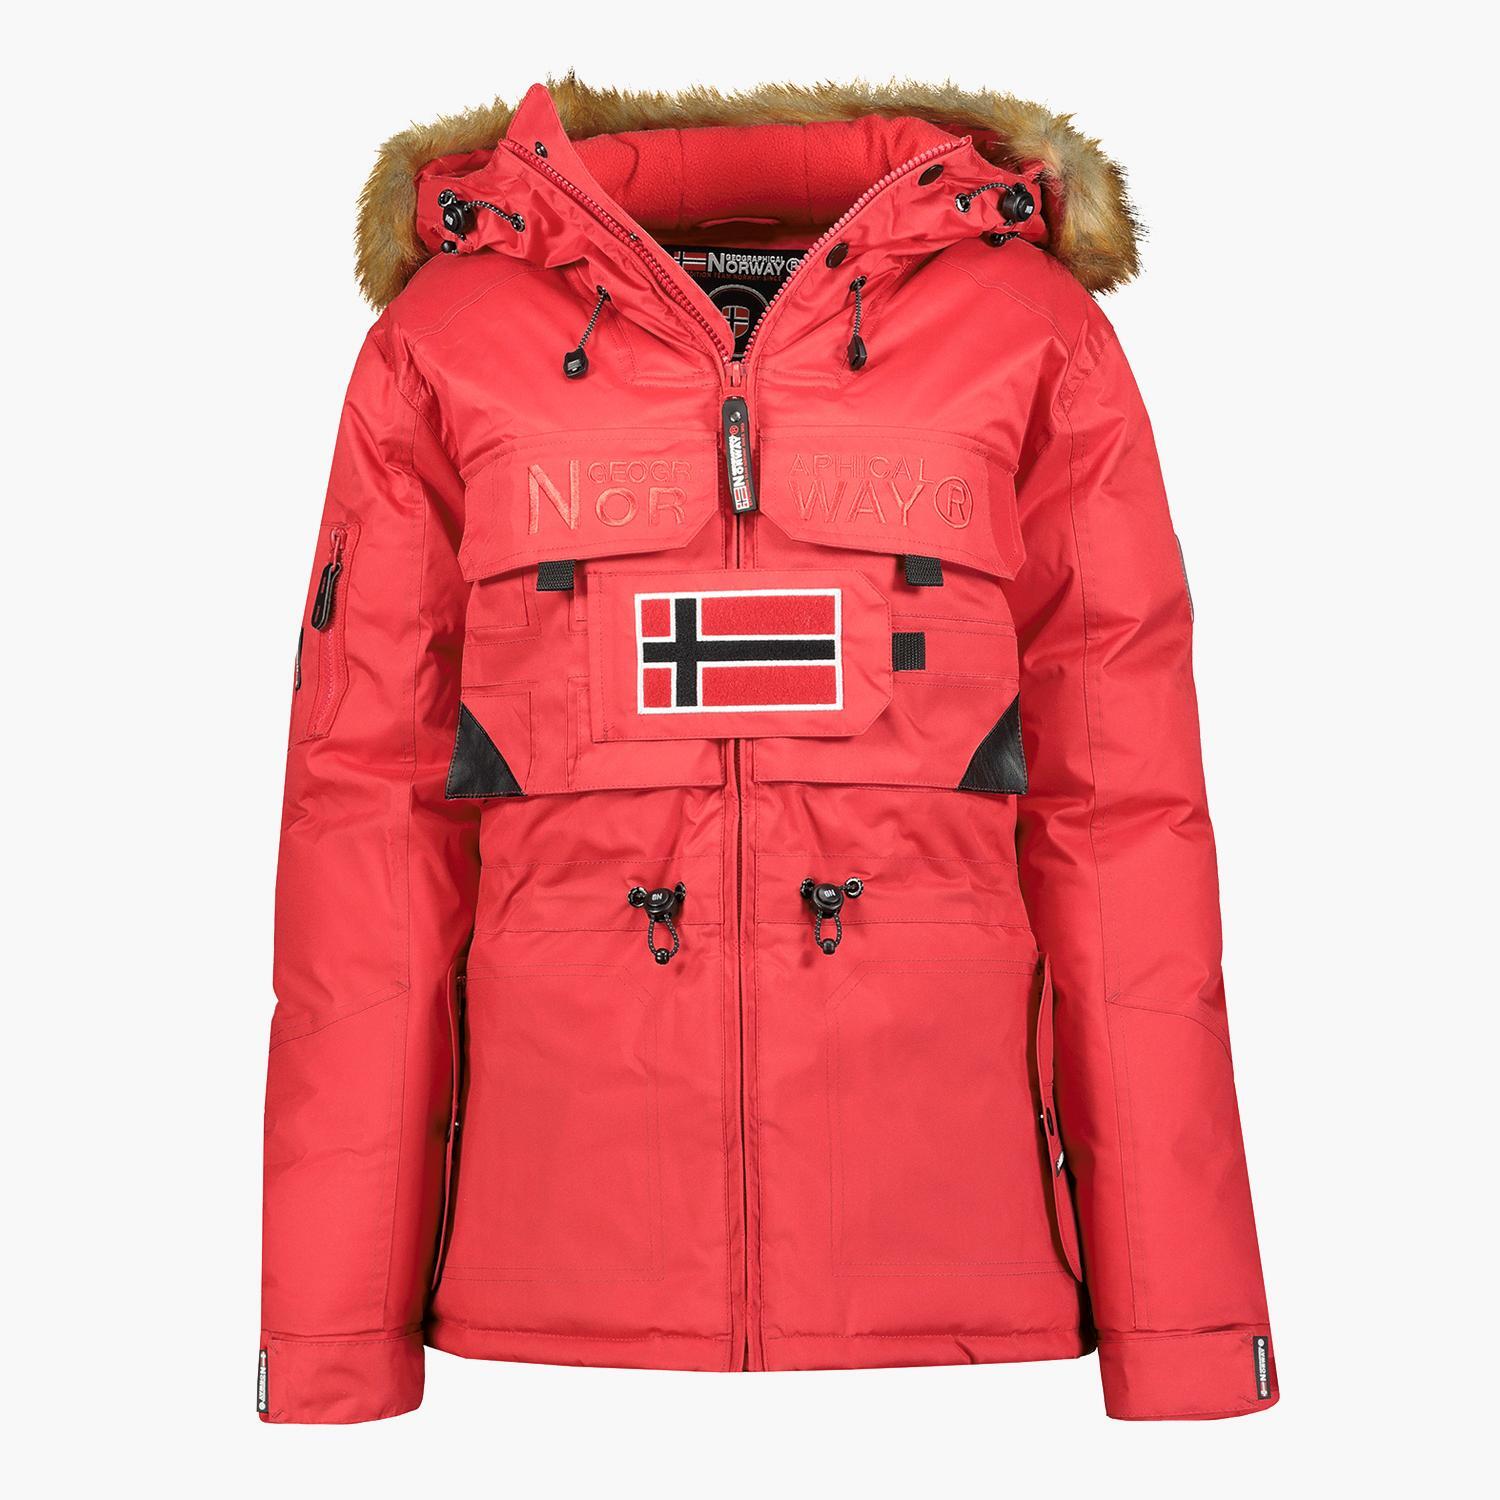 Geographical Norway parka hombre - Geographical Norway España ®